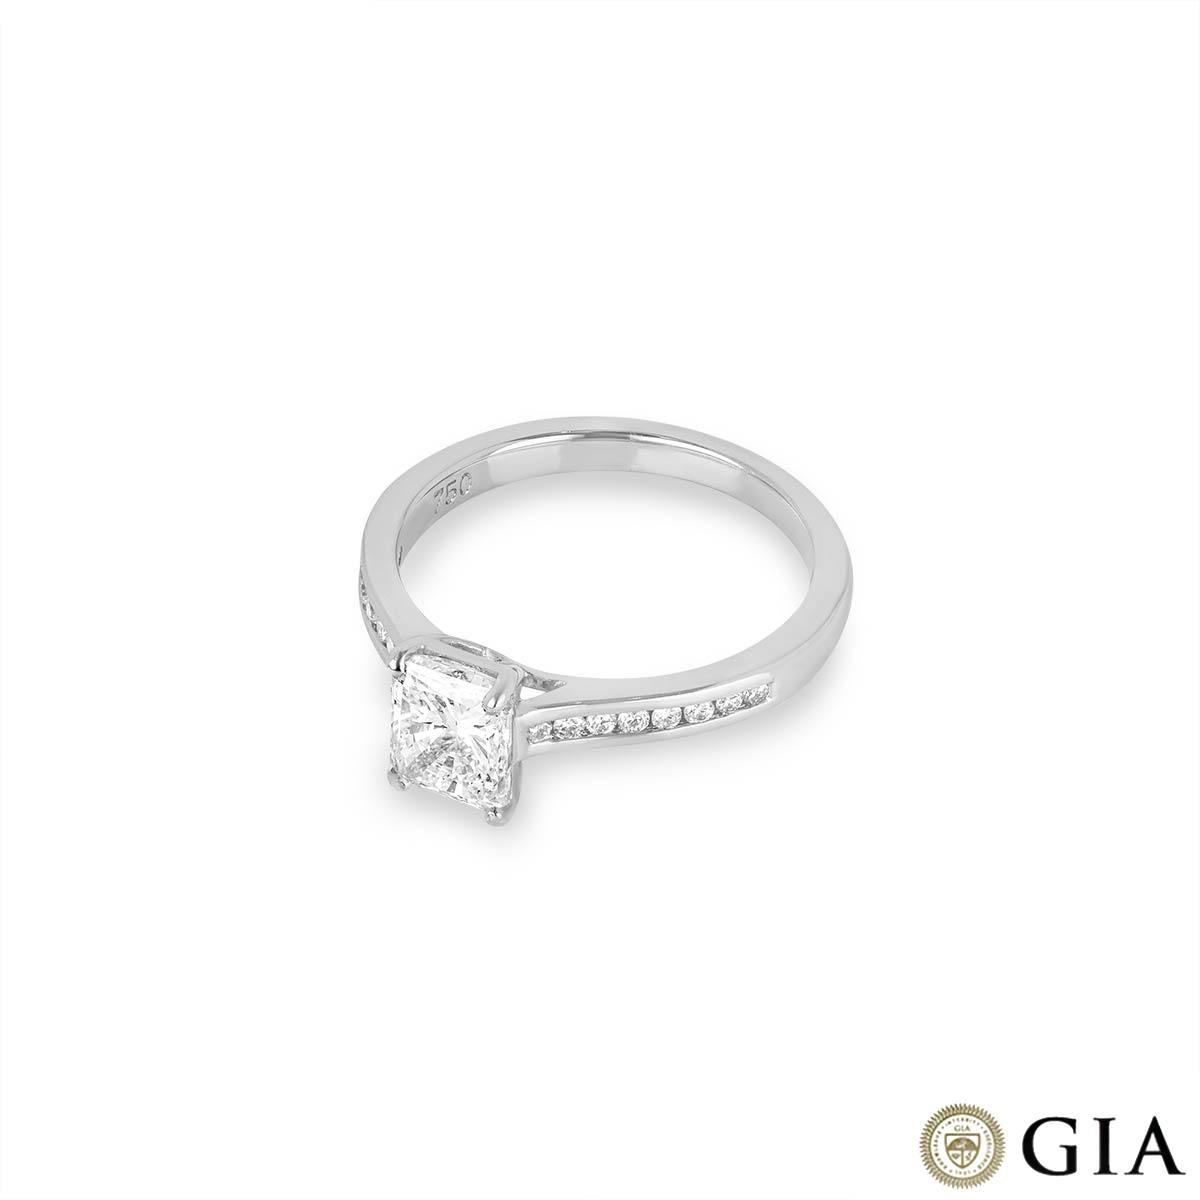 Women's GIA Certified Radiant Cut Diamond Solitaire Engagement Ring 1.01 Carat For Sale